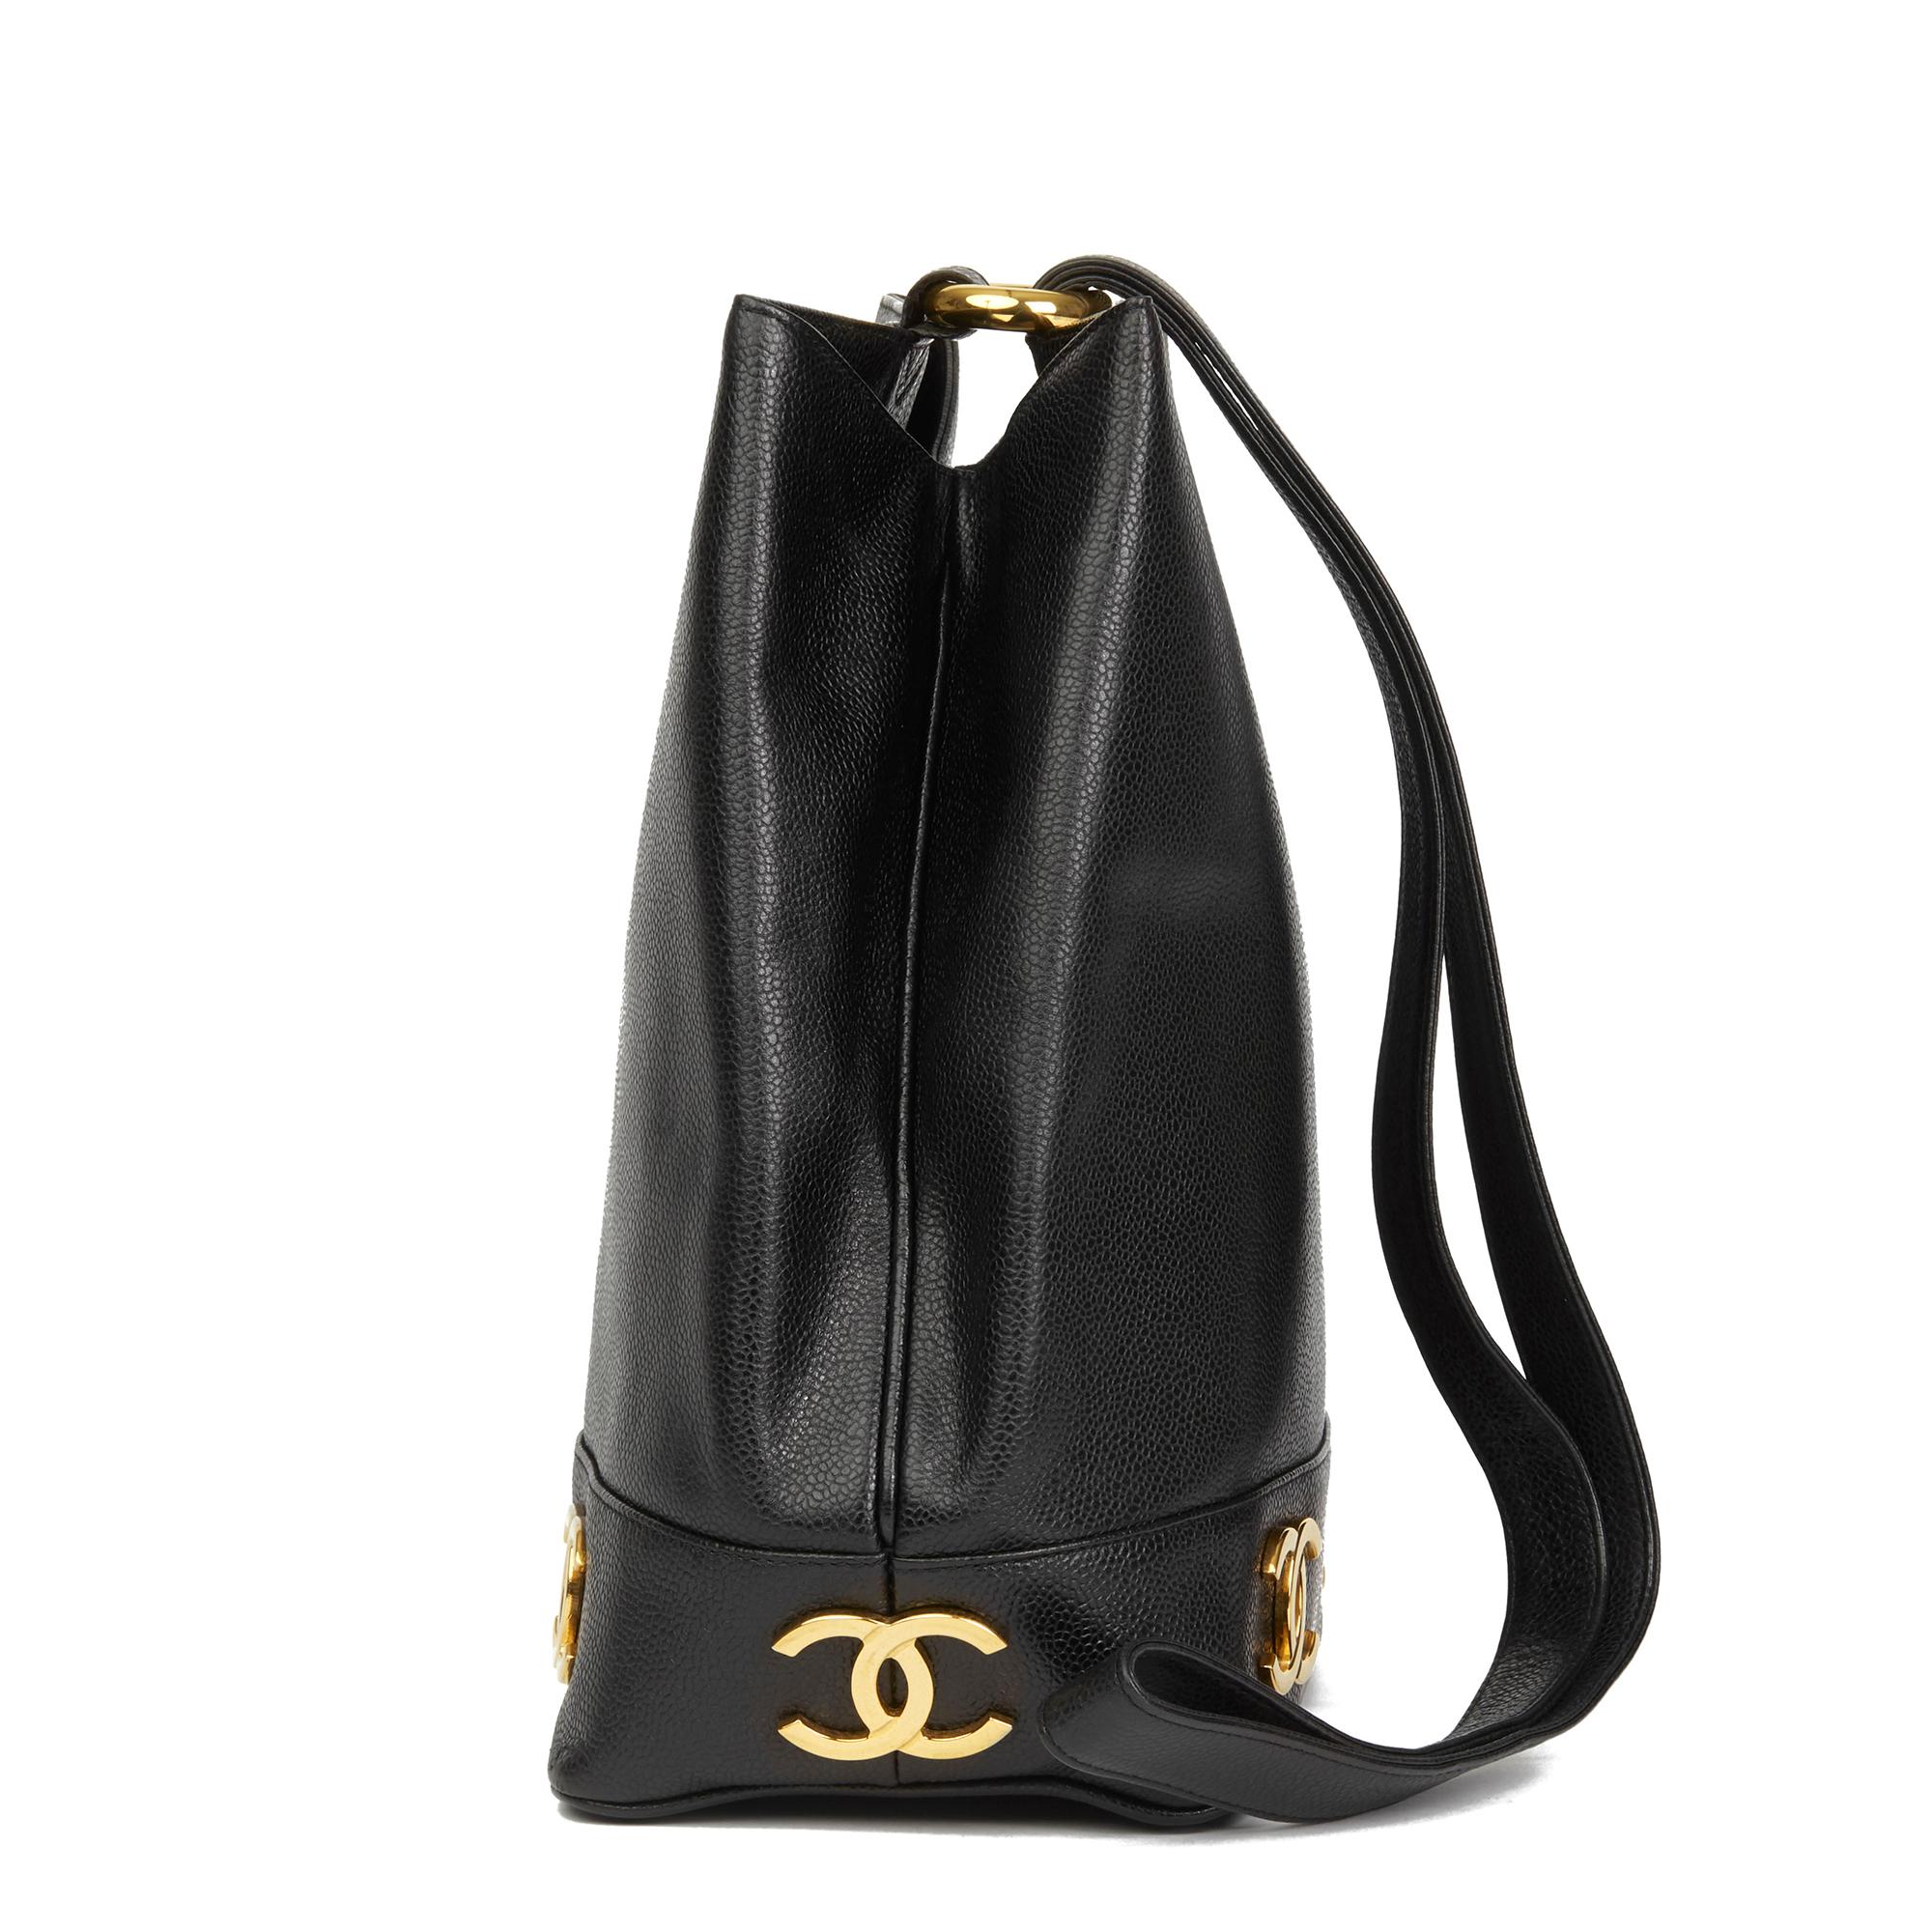 CHANEL
Black Caviar Leather Vintage Logo Trim Bucket Bag

 Reference: HB2893
Serial Number: 2896889
Age (Circa): 1992
Accompanied By: Chanel Dust Bag, Authenticity Card
Authenticity Details: Authenticity Card, Serial Sticker (Made in Italy)
Gender: